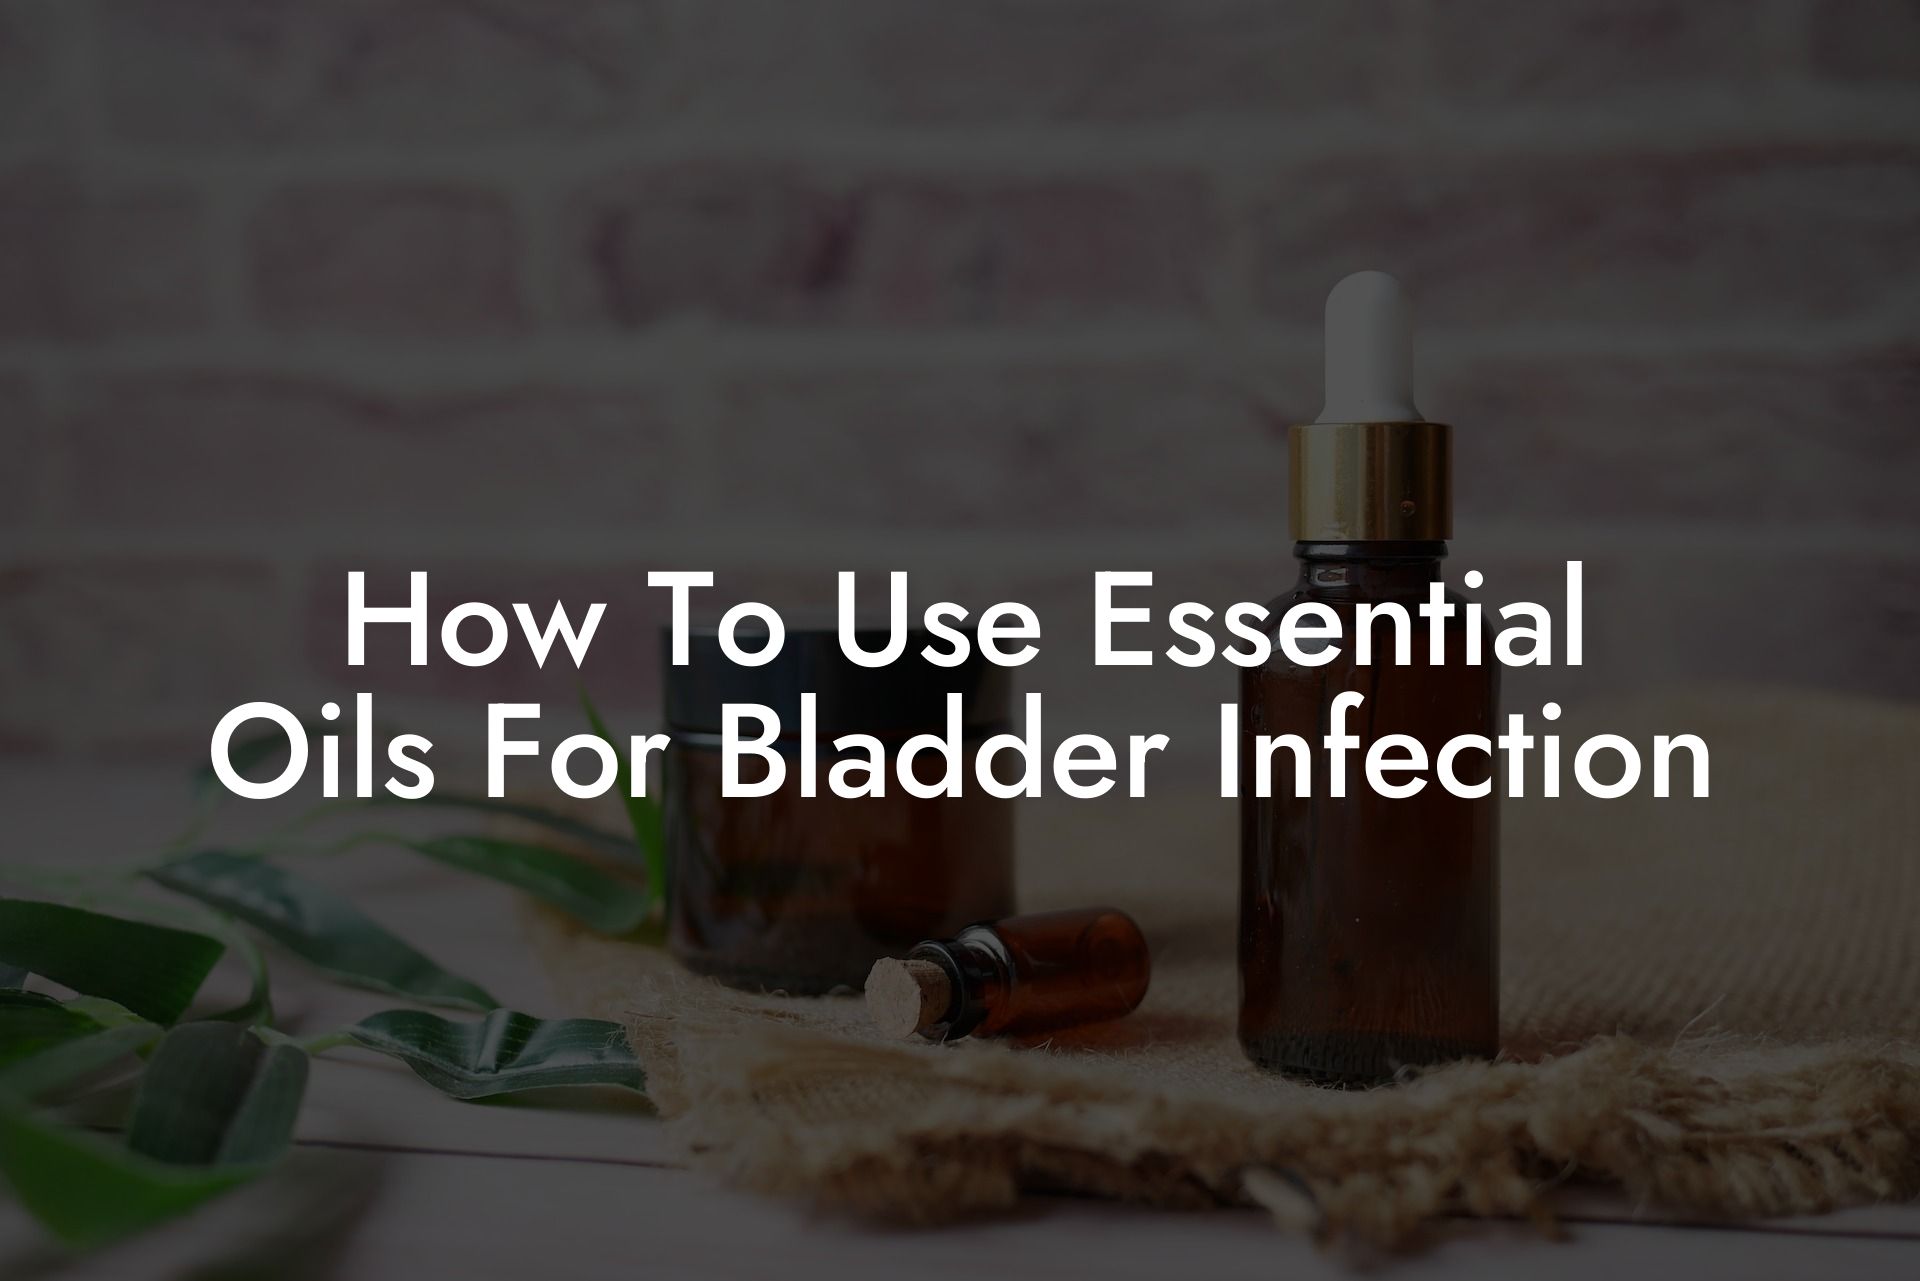 How To Use Essential Oils For Bladder Infection